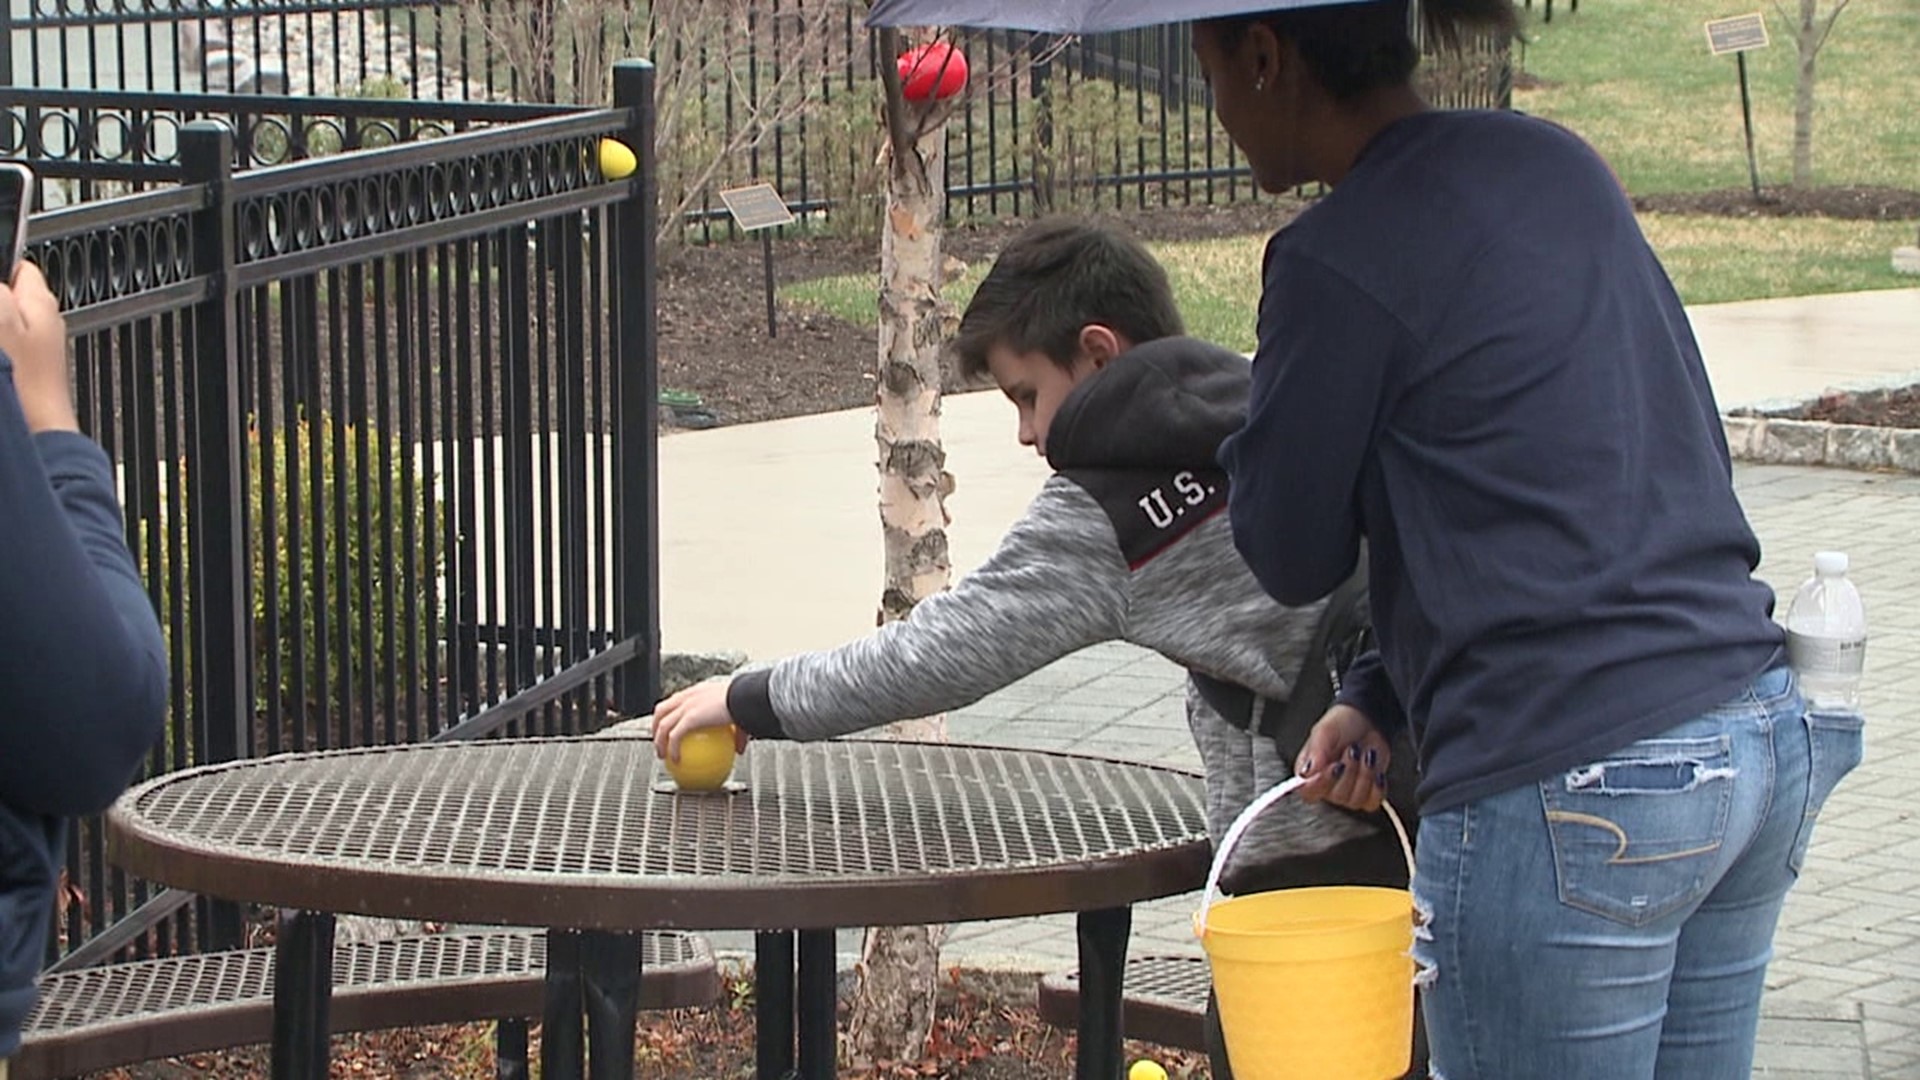 A creative Easter egg activity took place at Wilkes University on Sunday.